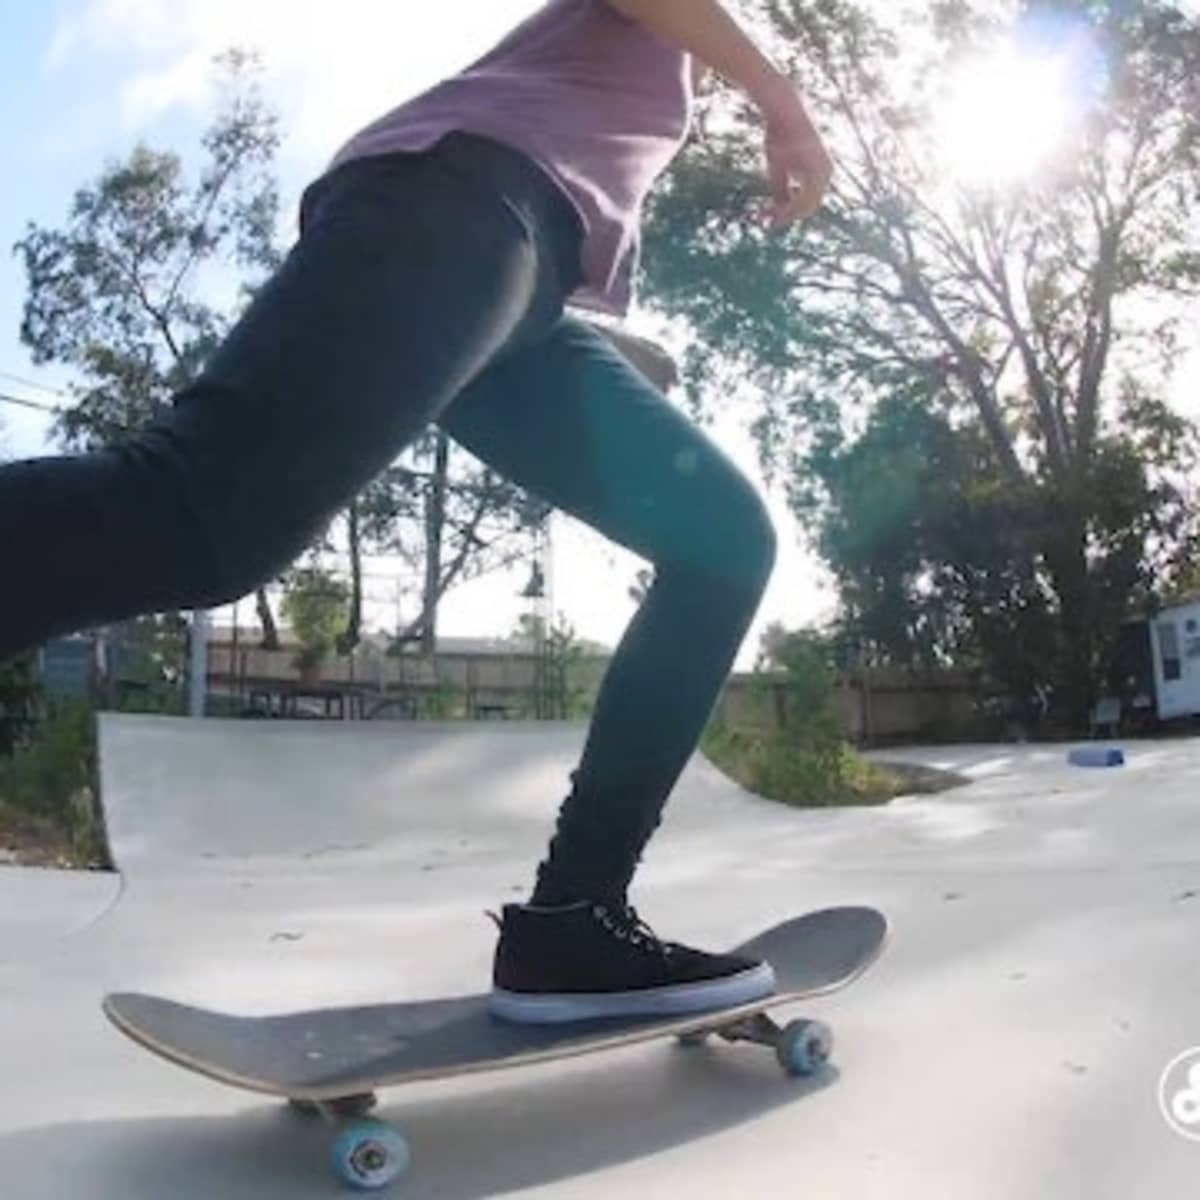 How to Skateboard: The Ultimate Beginner's Guide with Step-by-Step